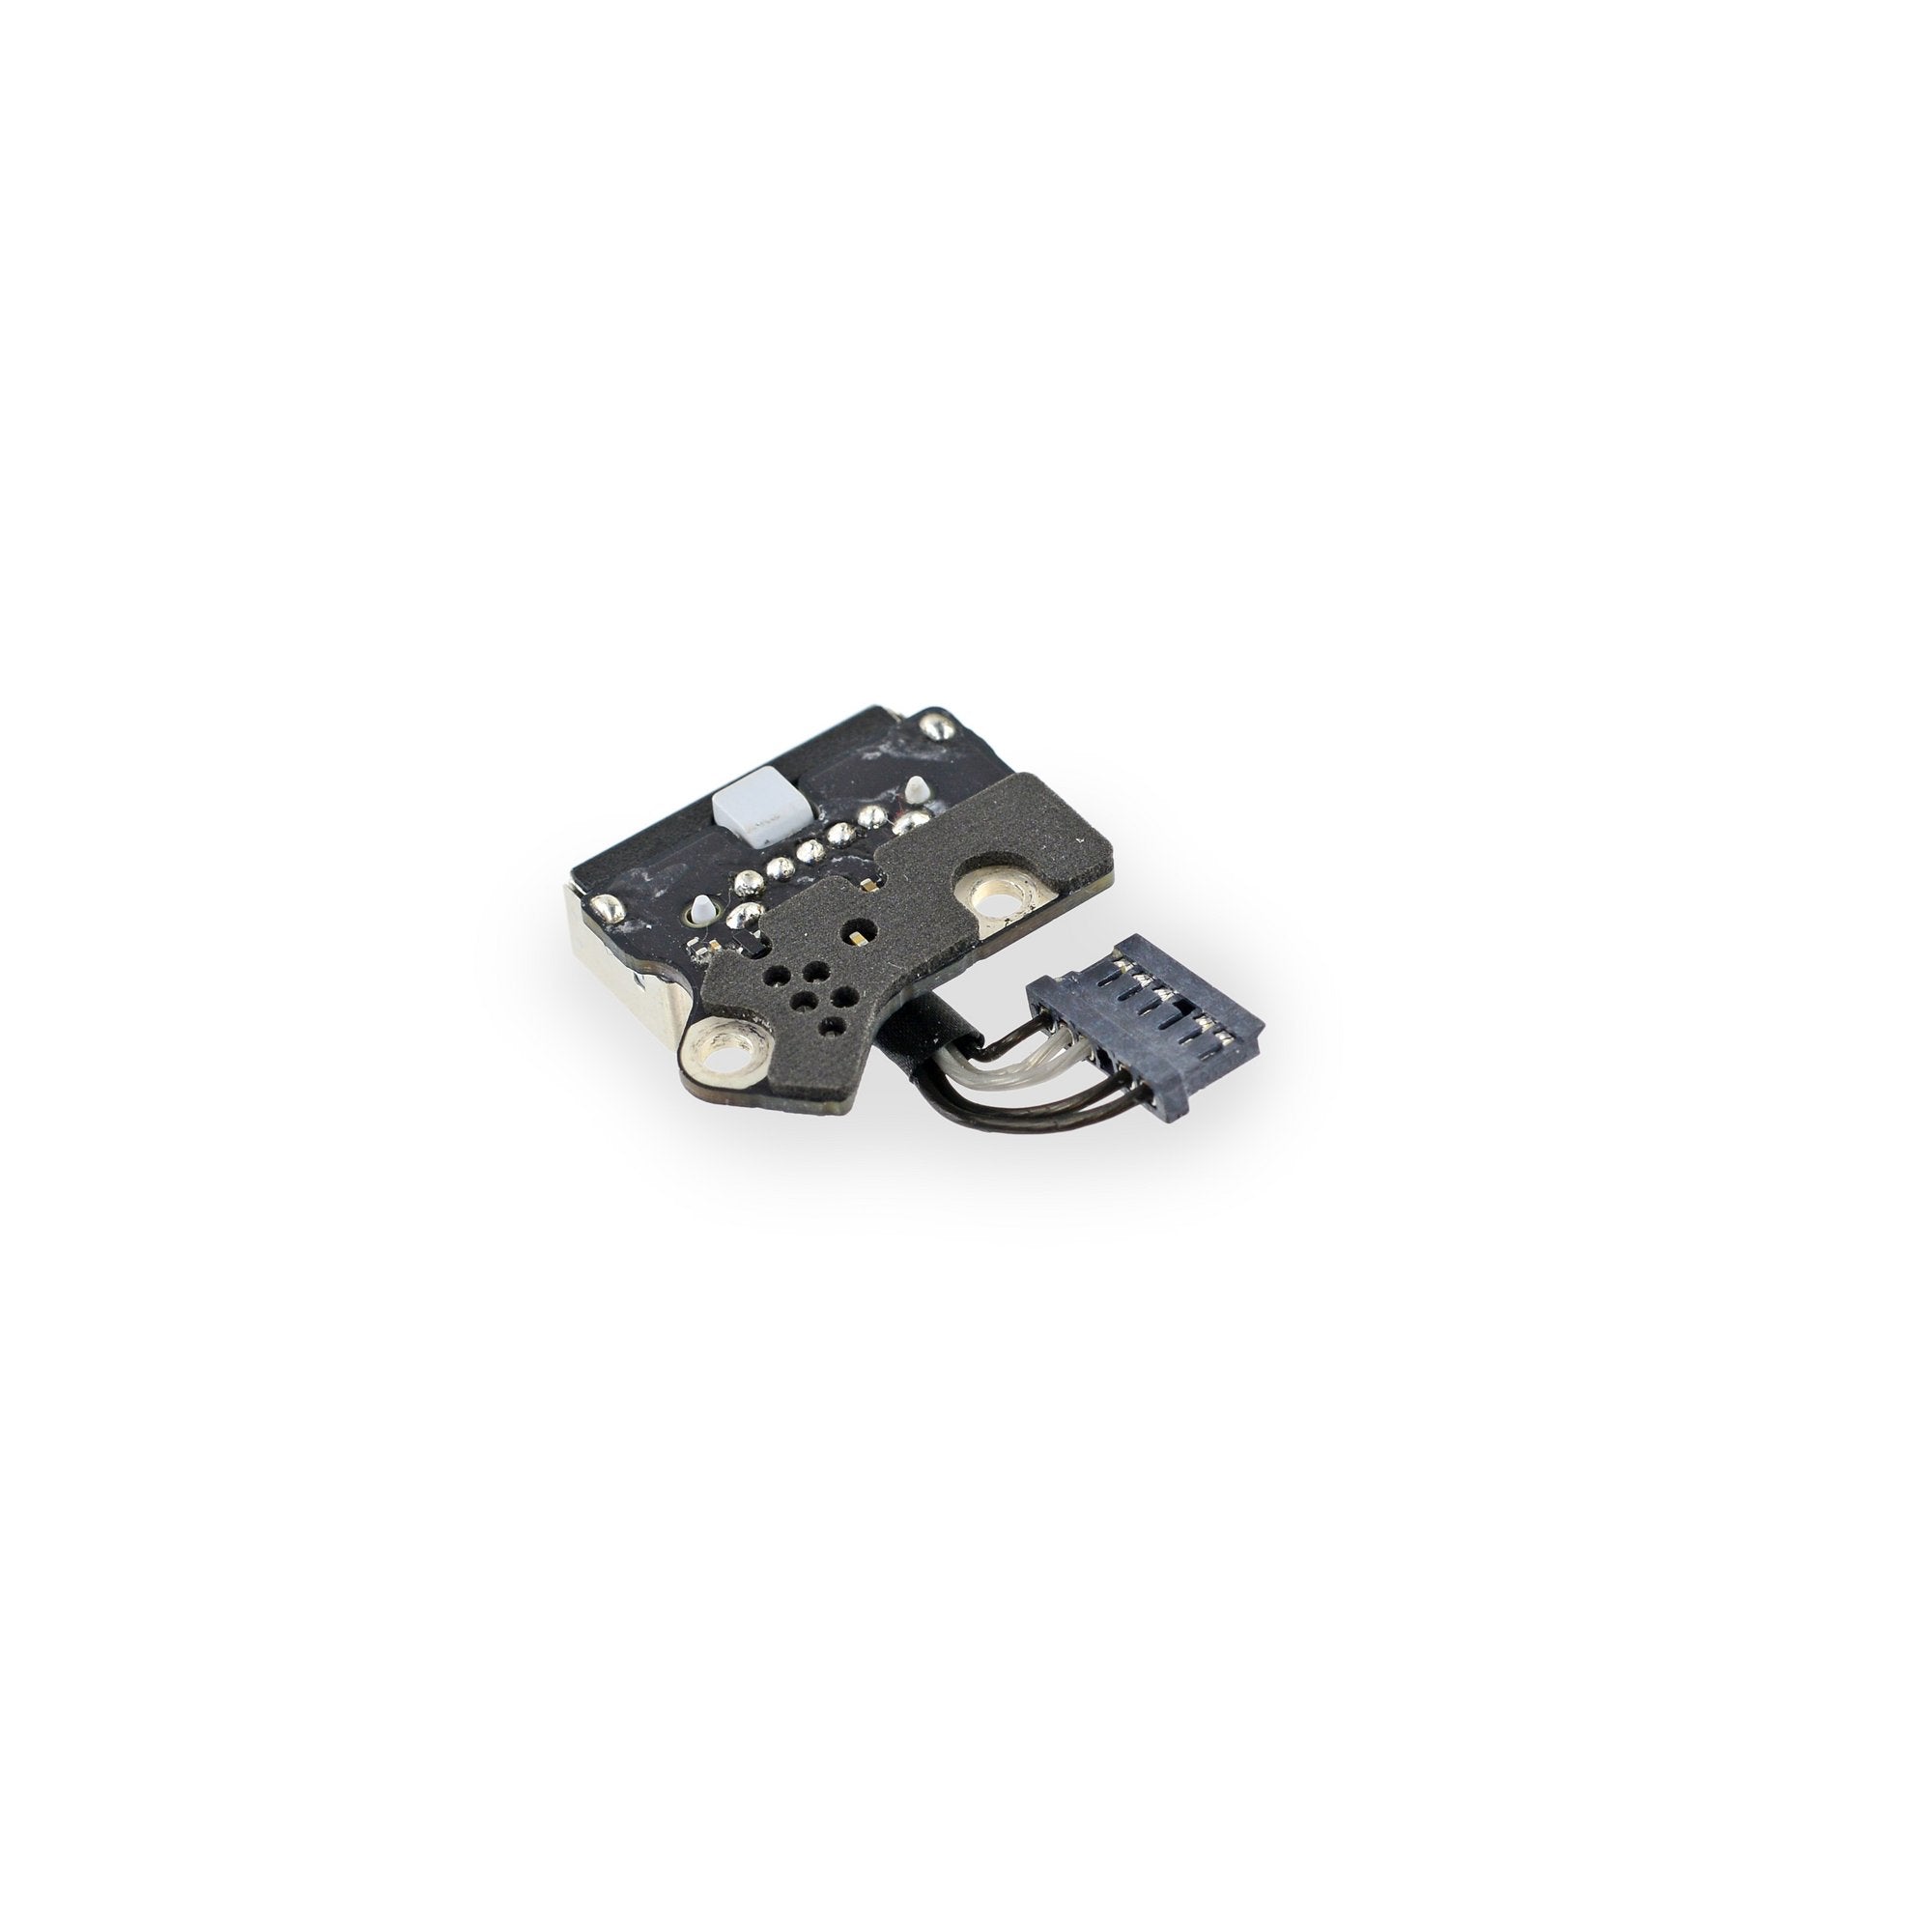 MacBook Pro 15" Retina (Late 2013-Mid 2015) MagSafe 2 DC-In Board